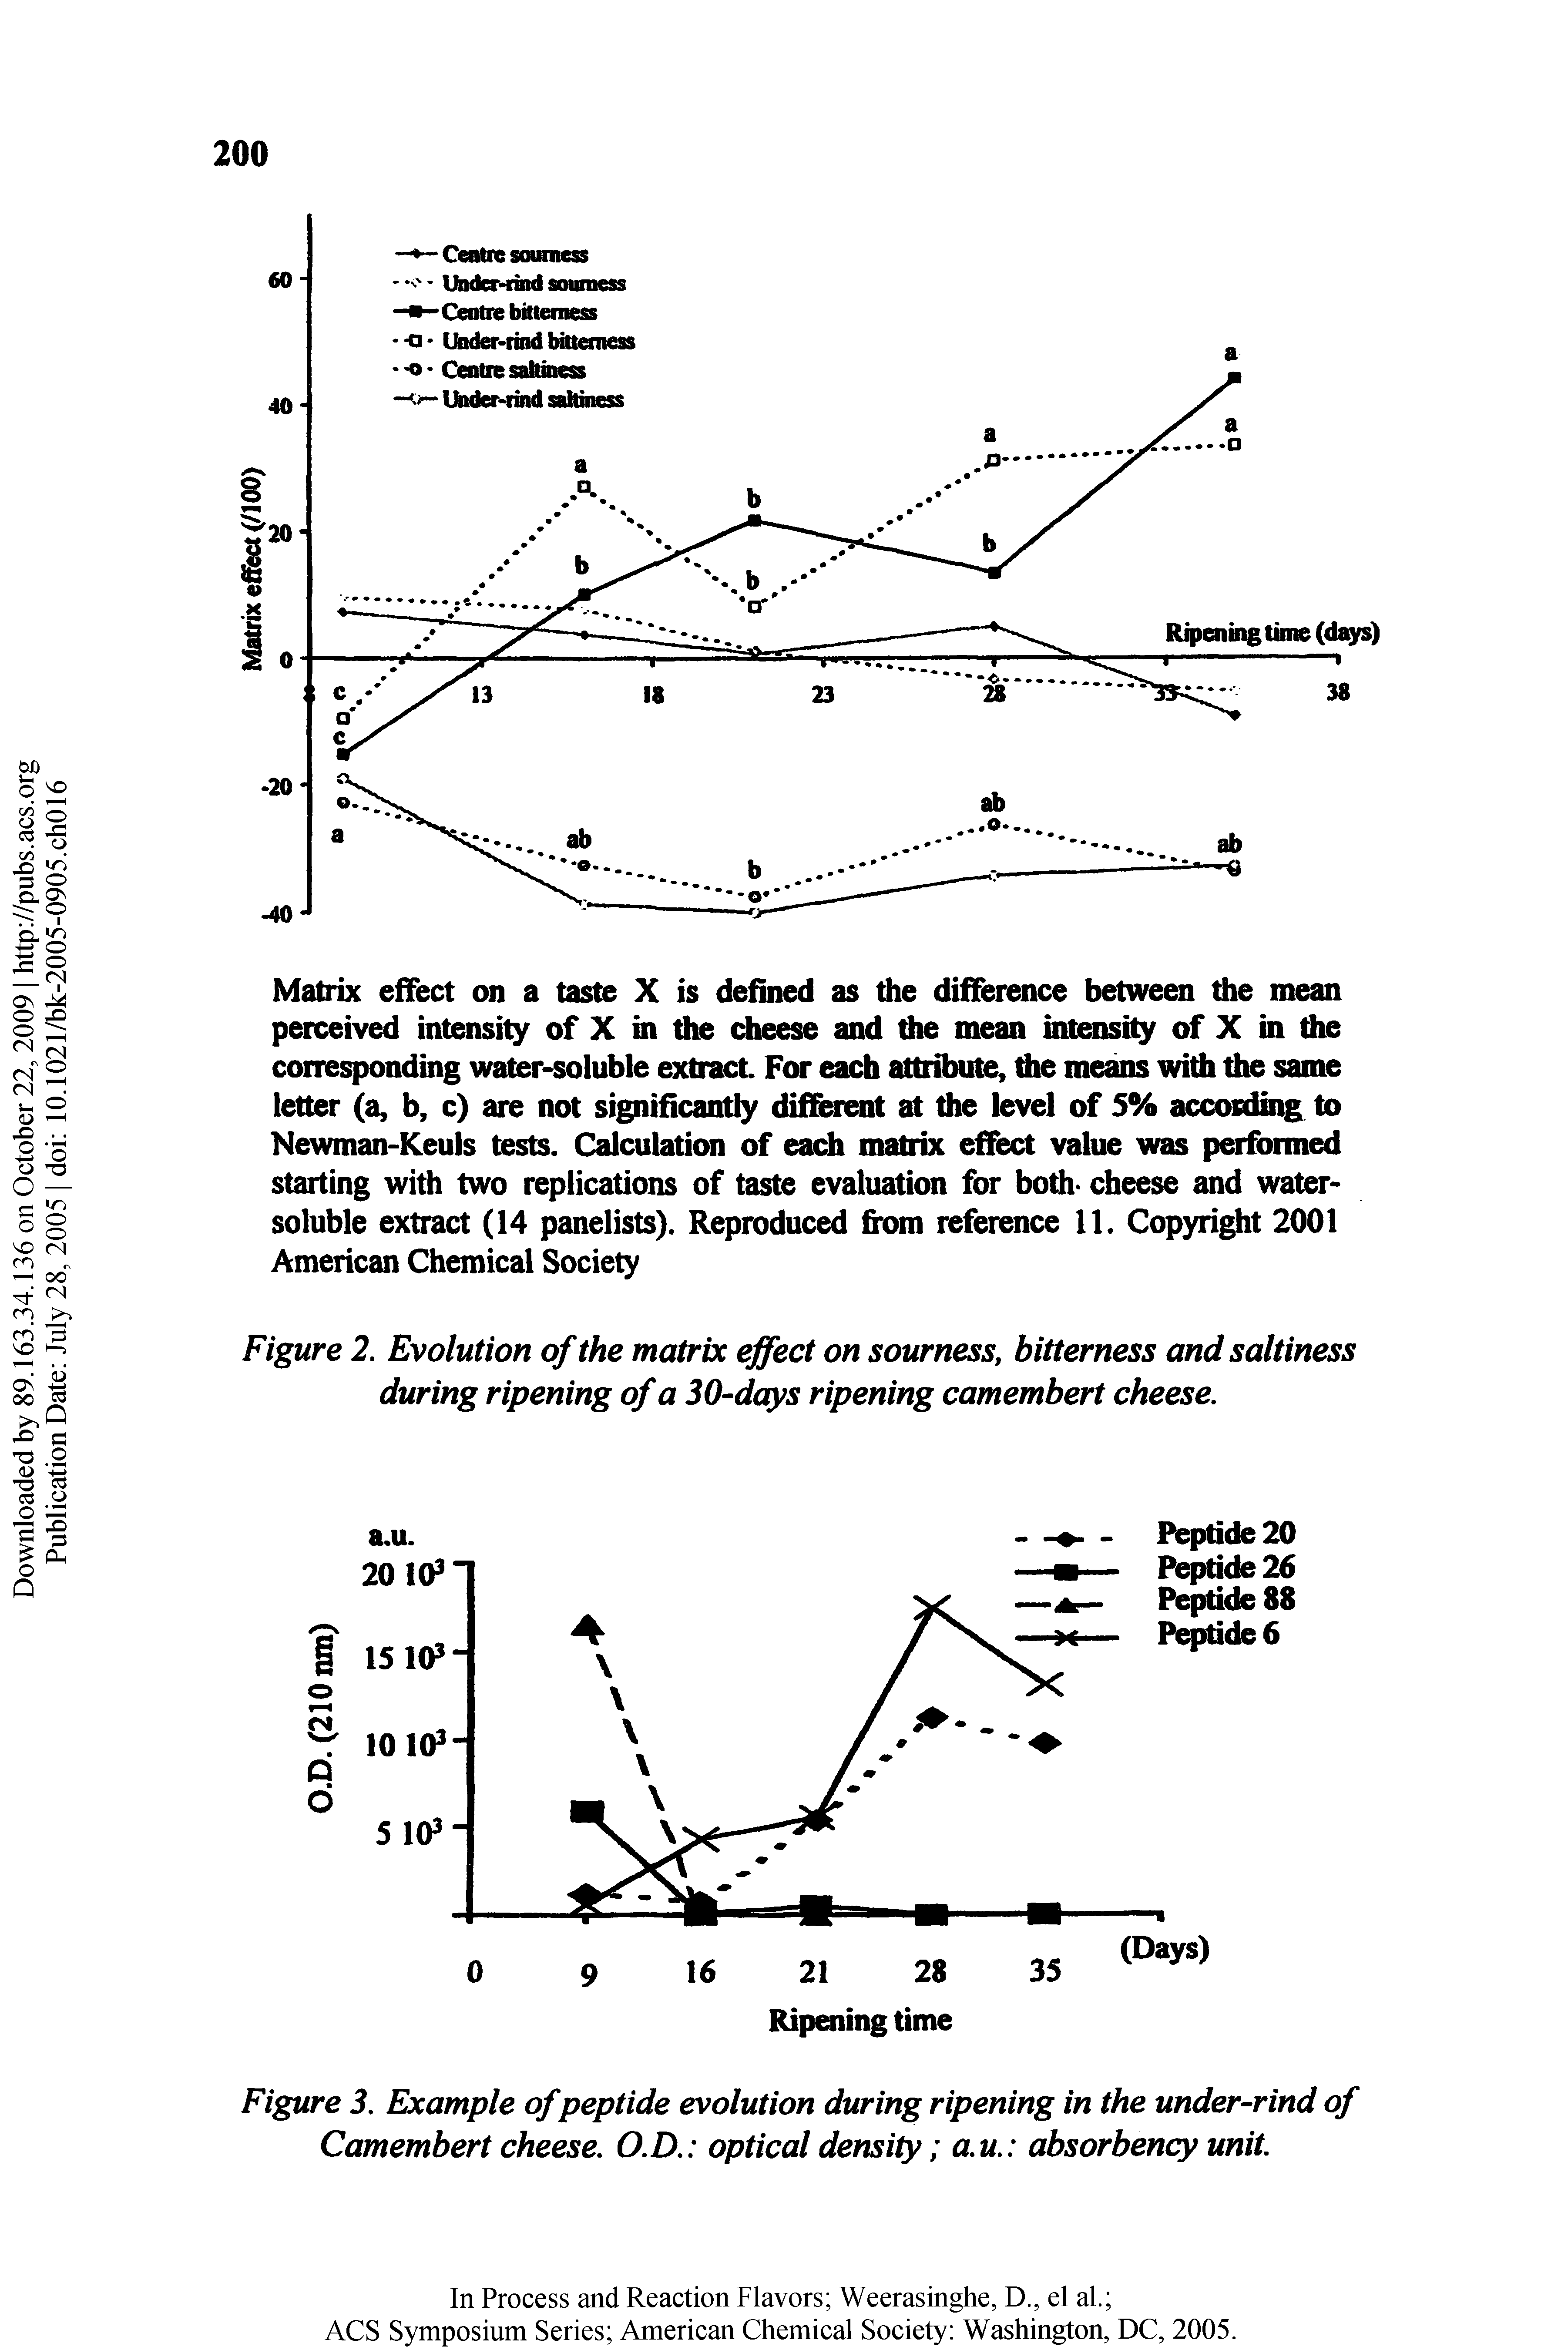 Figure 3. Example of peptide evolution during ripening in the under-rind of Camembert cheese. O.D. optical density a.u. absorbency unit.